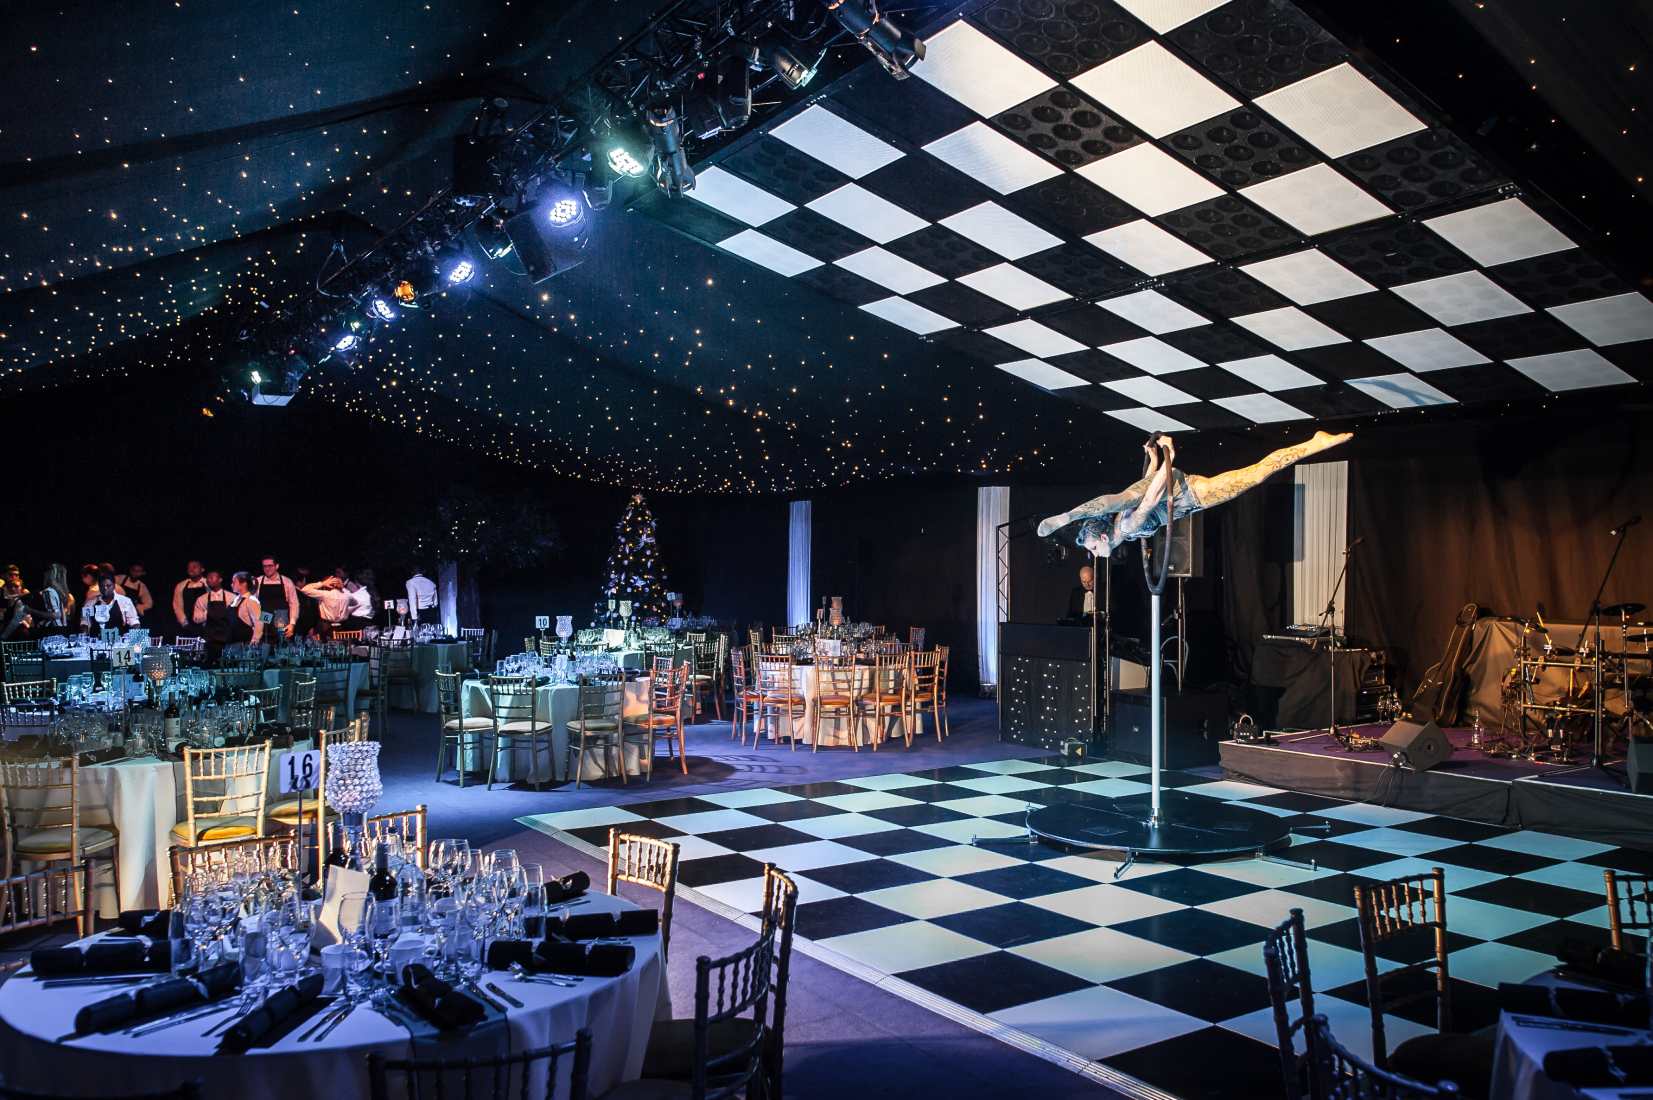 A function room dressed spectaculalry in black and white, with a black and white checked dance floor, a stage, band equipment and an acrobatic performer.